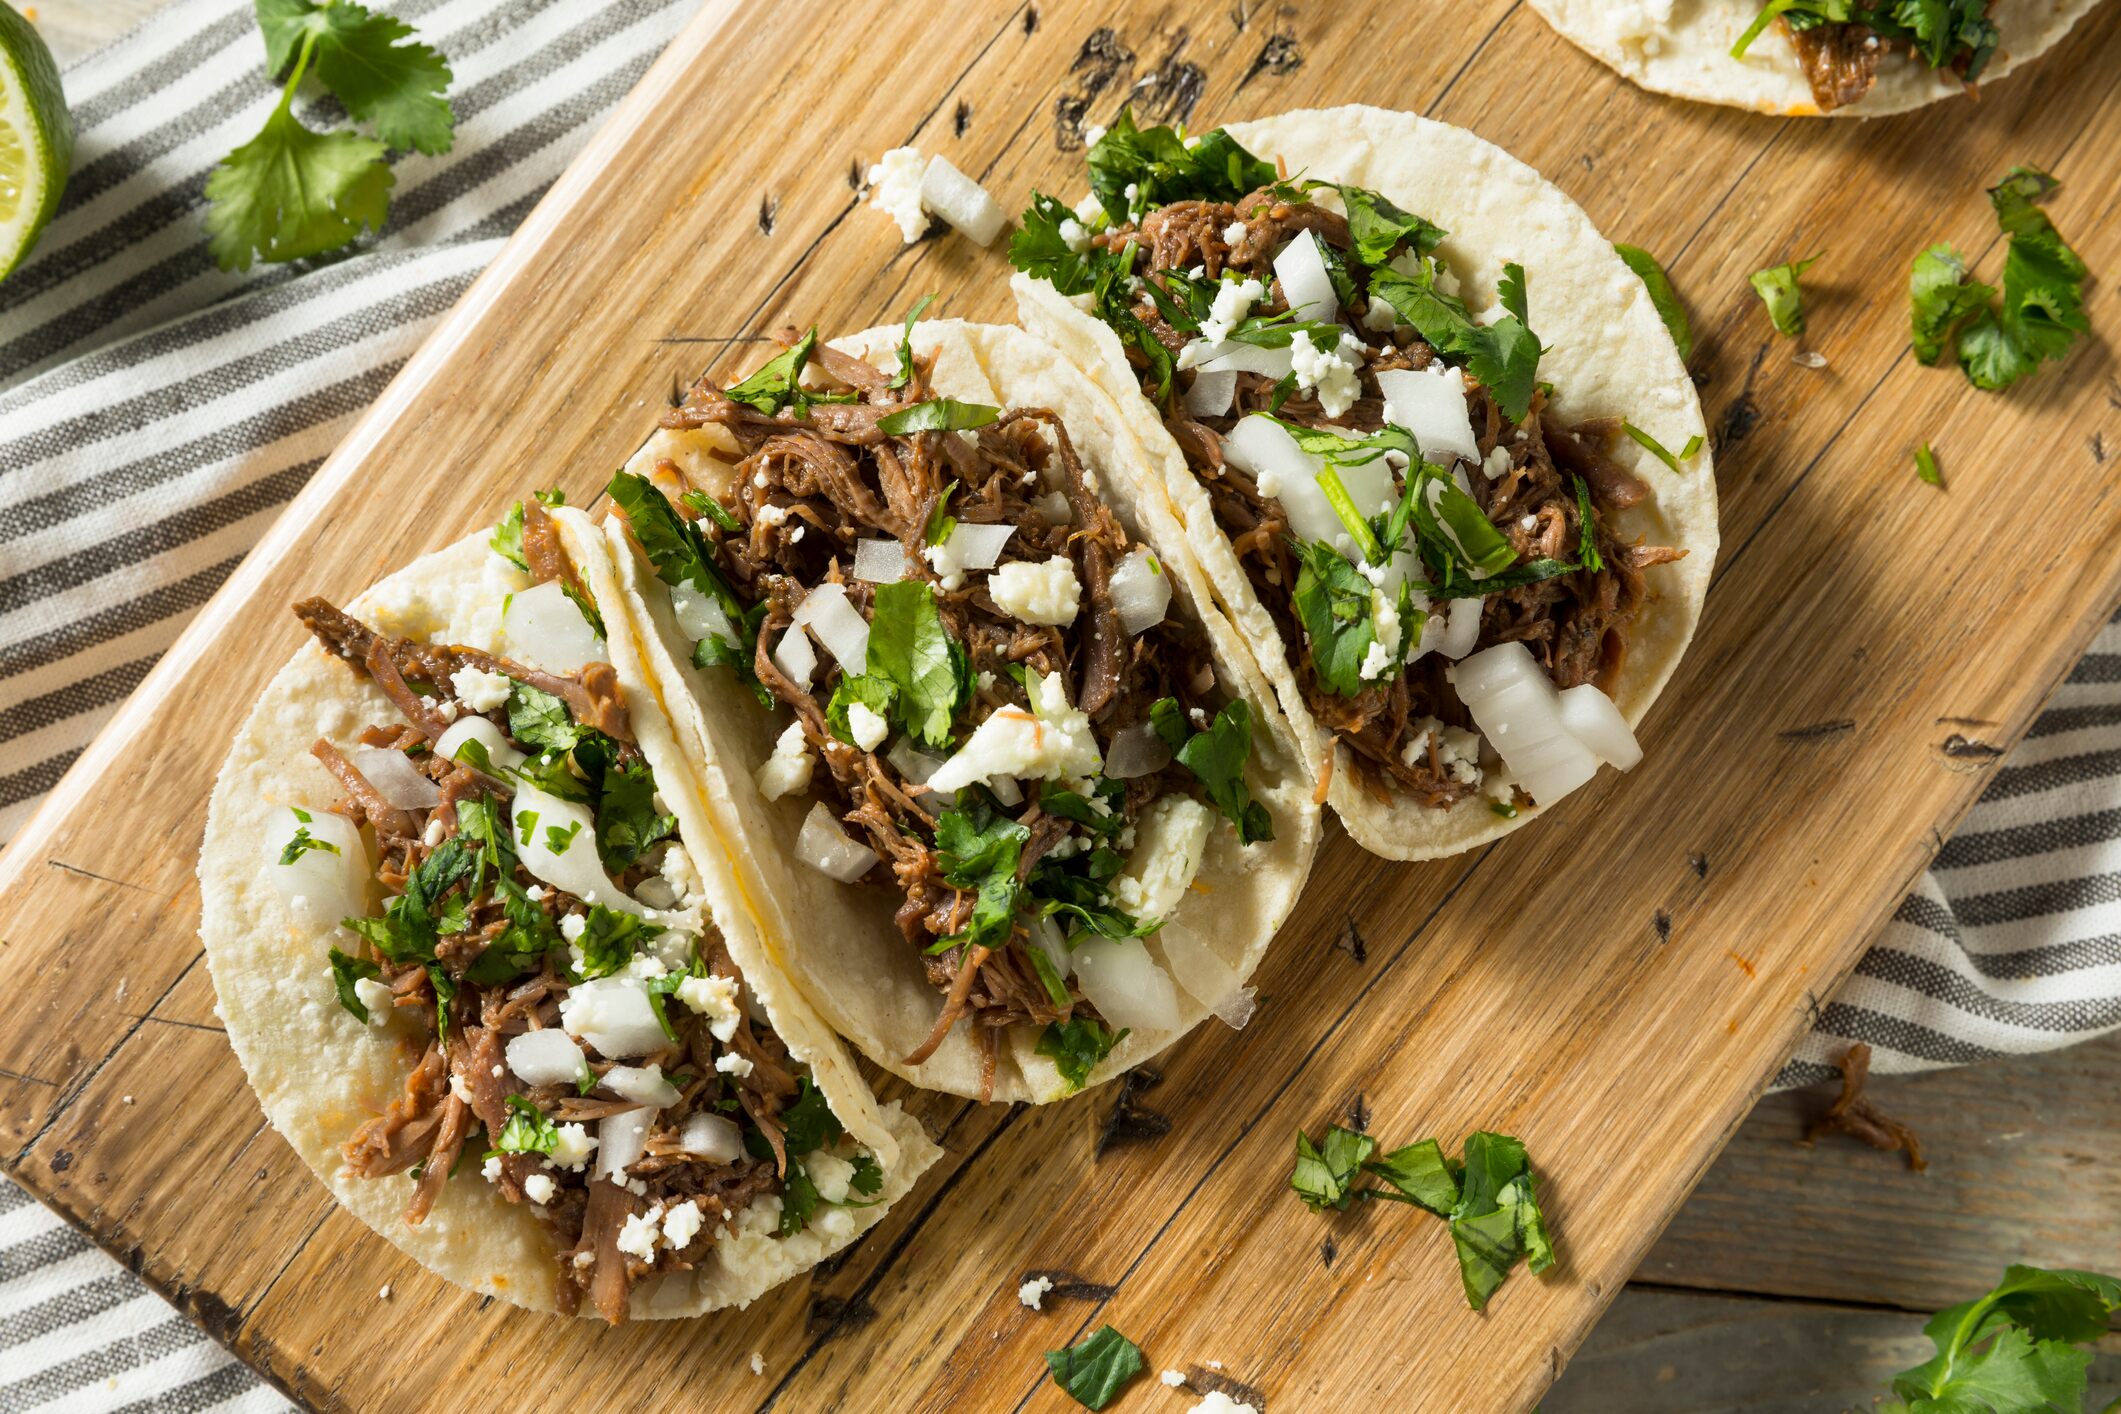 National Taco Deals 2020: Where to go for free tacos and other specials